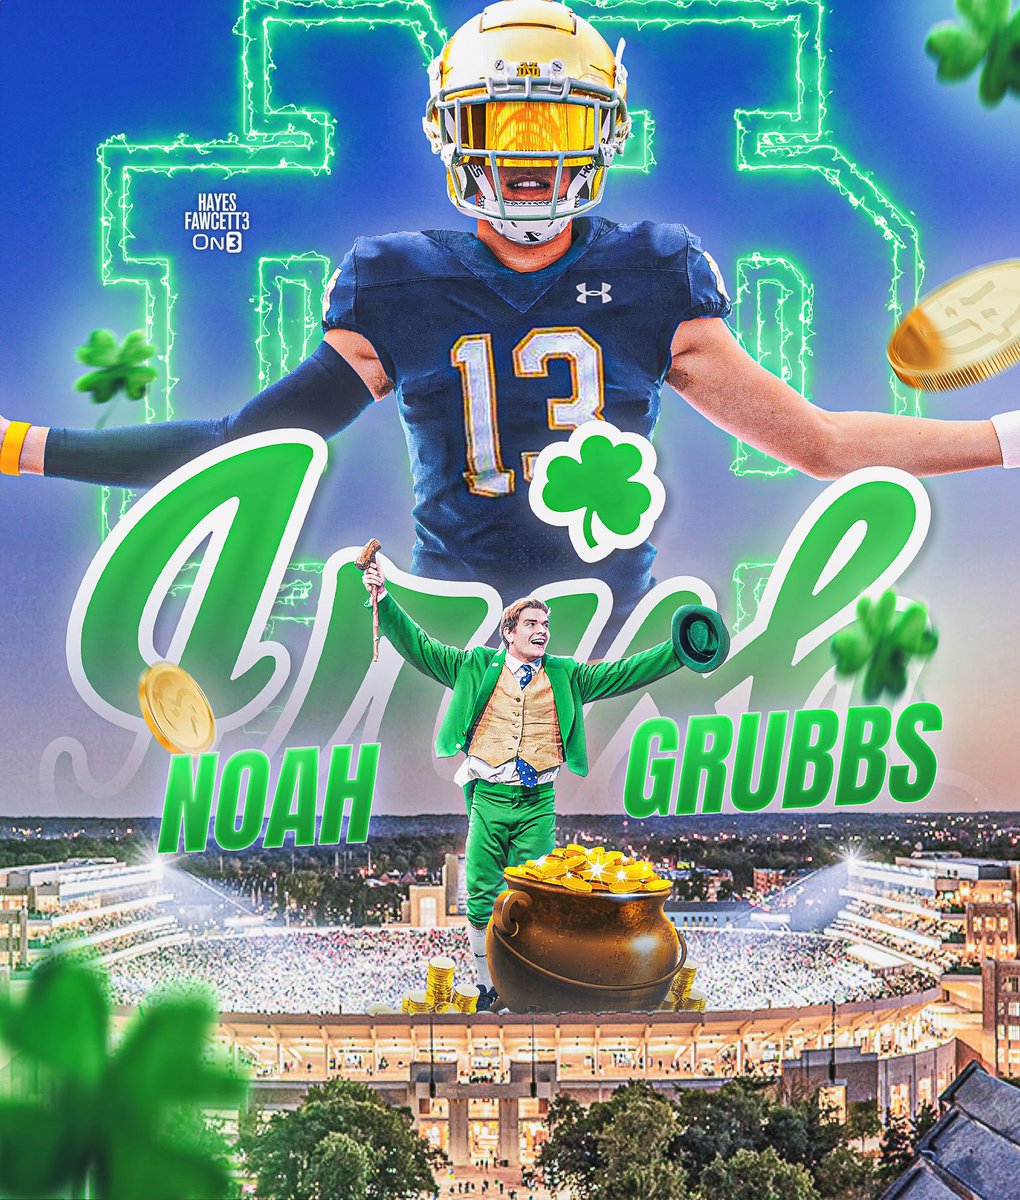 BREAKING: Four-Star QB Noah Grubbs (2026) has Committed to Notre Dame, he tells me for @on3recruits

The 6’5 195 QB from Lake Mary, FL chose the Fighting Irish over Michigan, UNC, & Miami

Top 10 QB in the ‘26 Class (per On3 Industry)

“All Glory to God, we’re bring a National